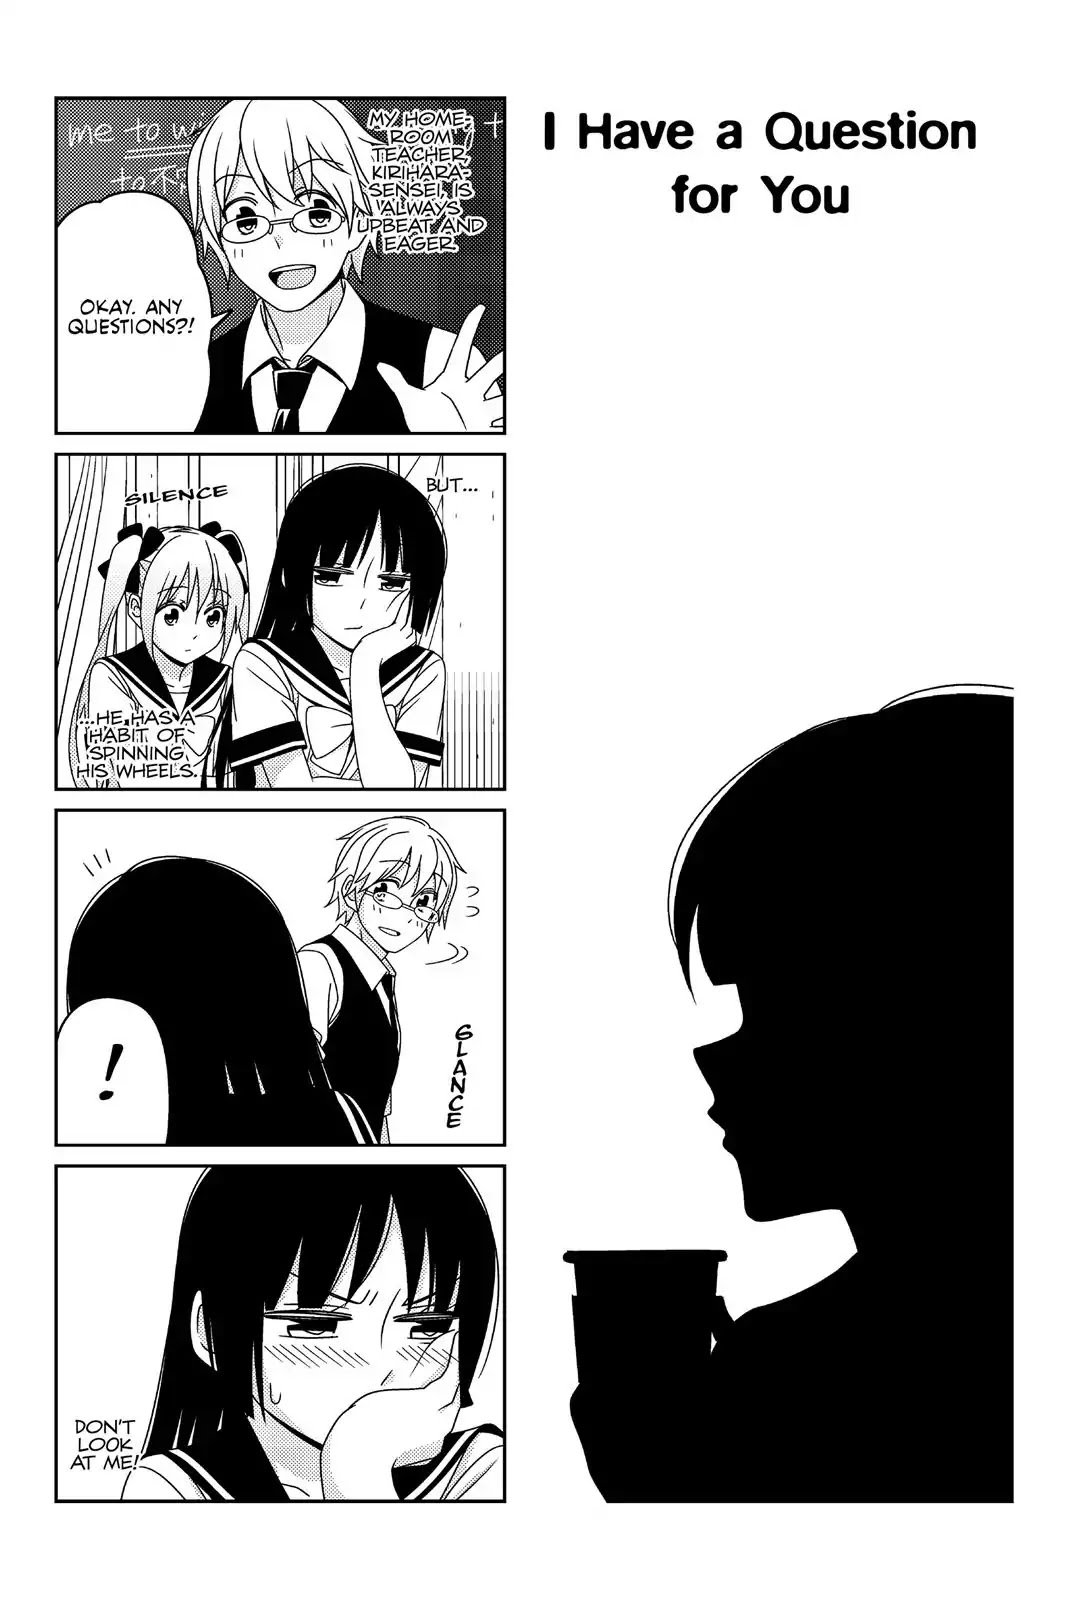 Tsurezure Children Chapter 34: I Have A Question For You (Kirihara/chiba) - Picture 1